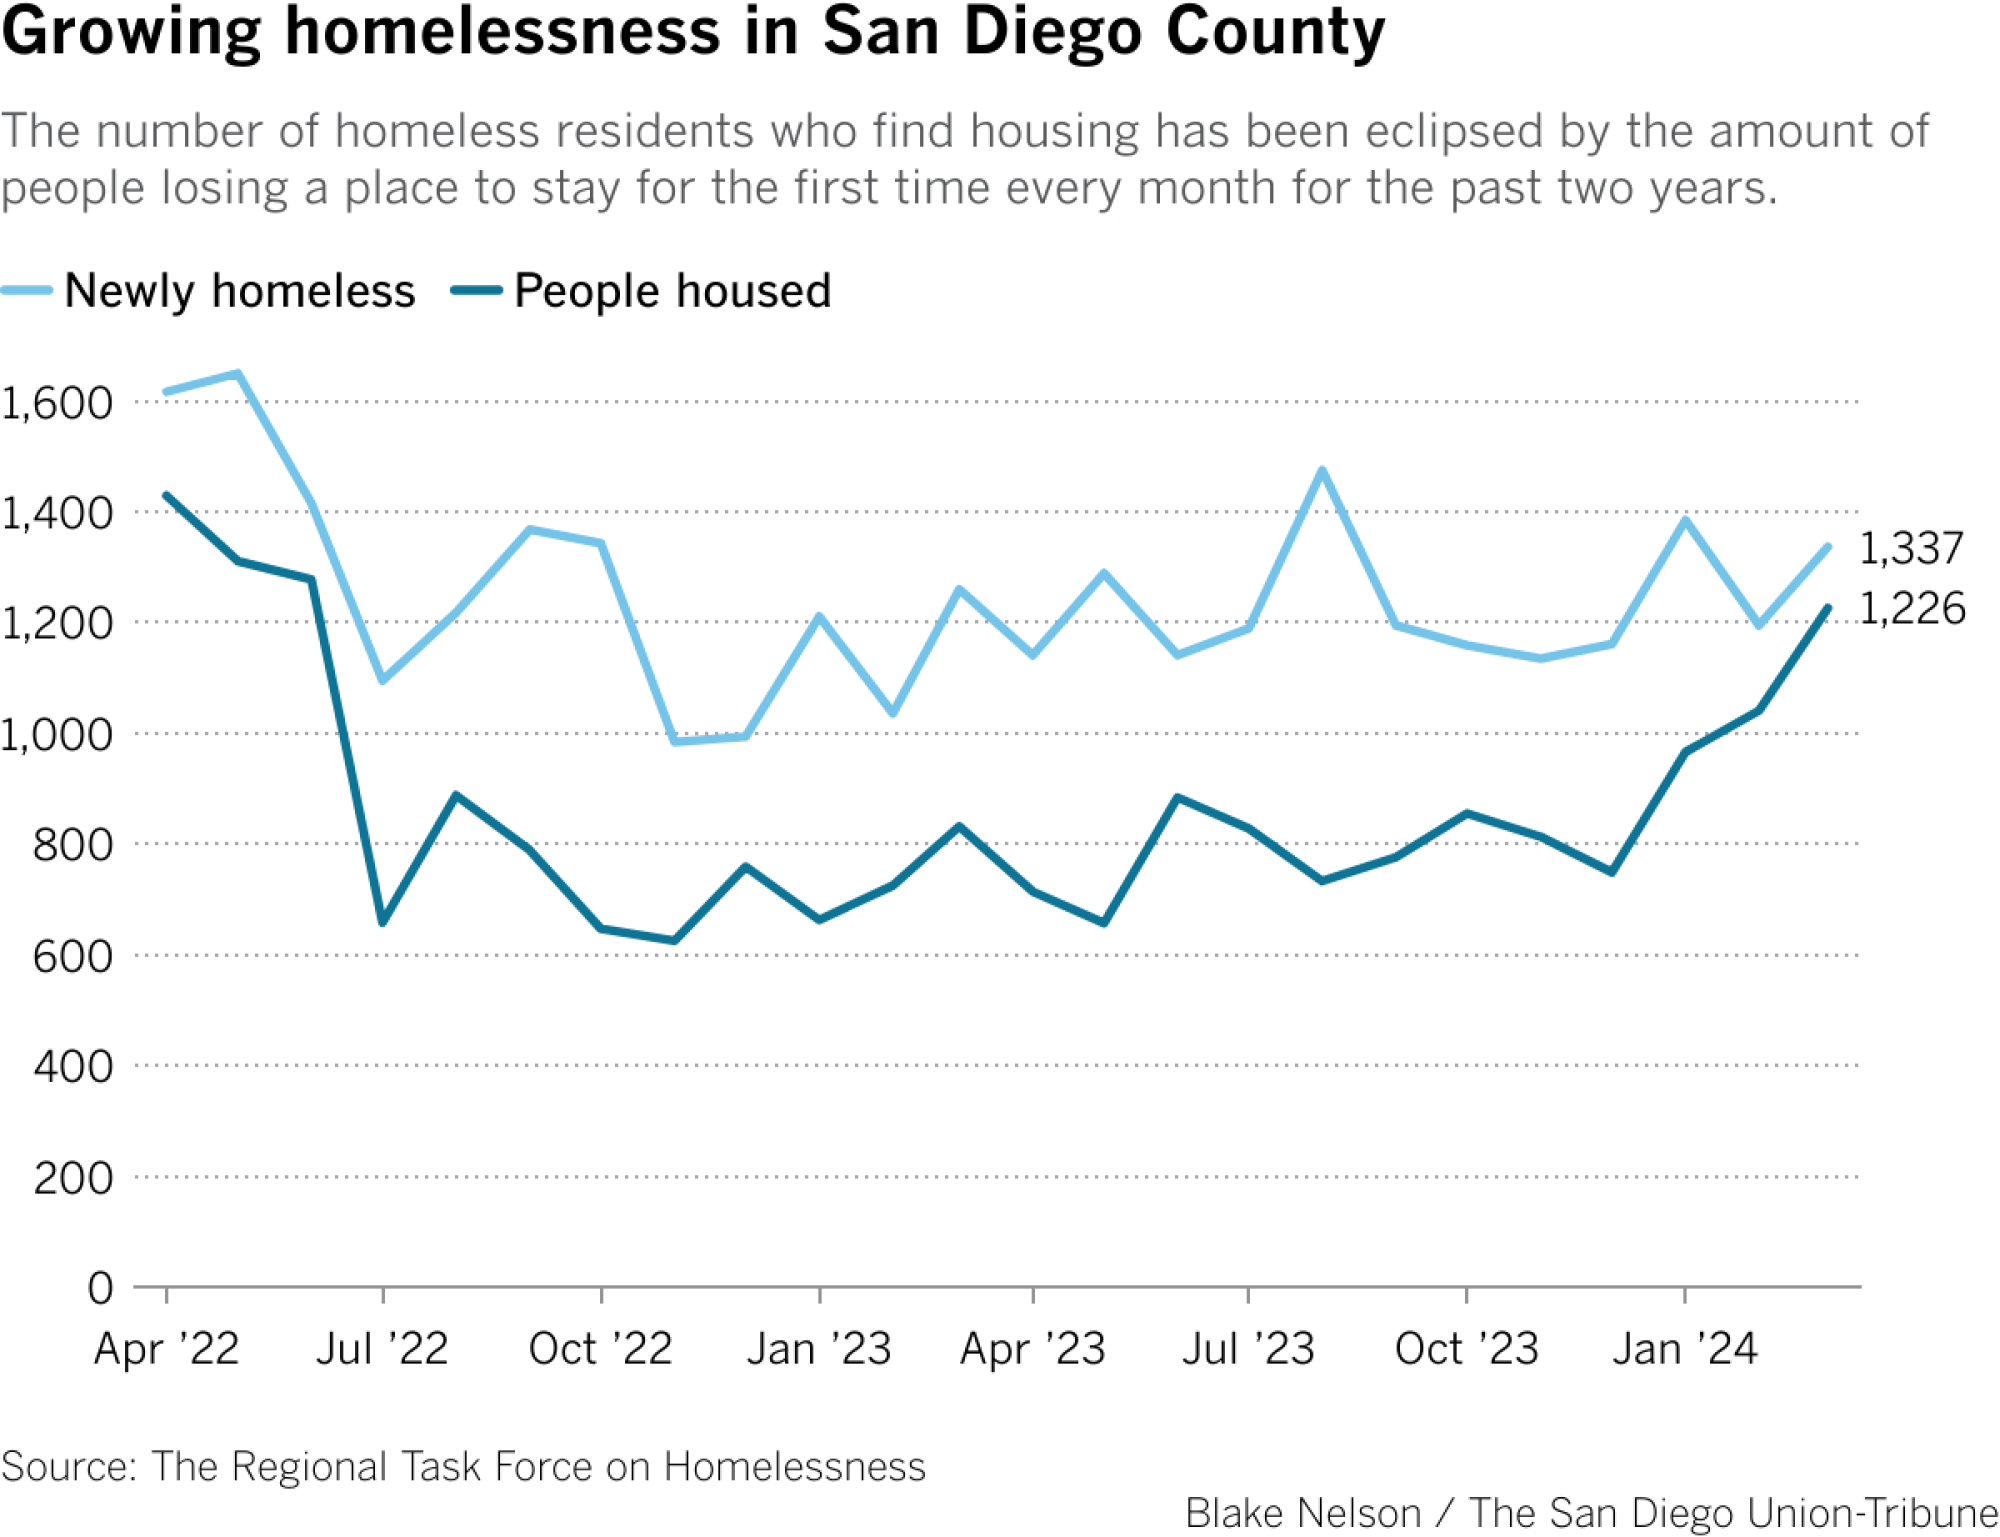 The number of homeless residents who find housing has been eclipsed by the amount of people losing a place to stay for the first time every month for the past two years.